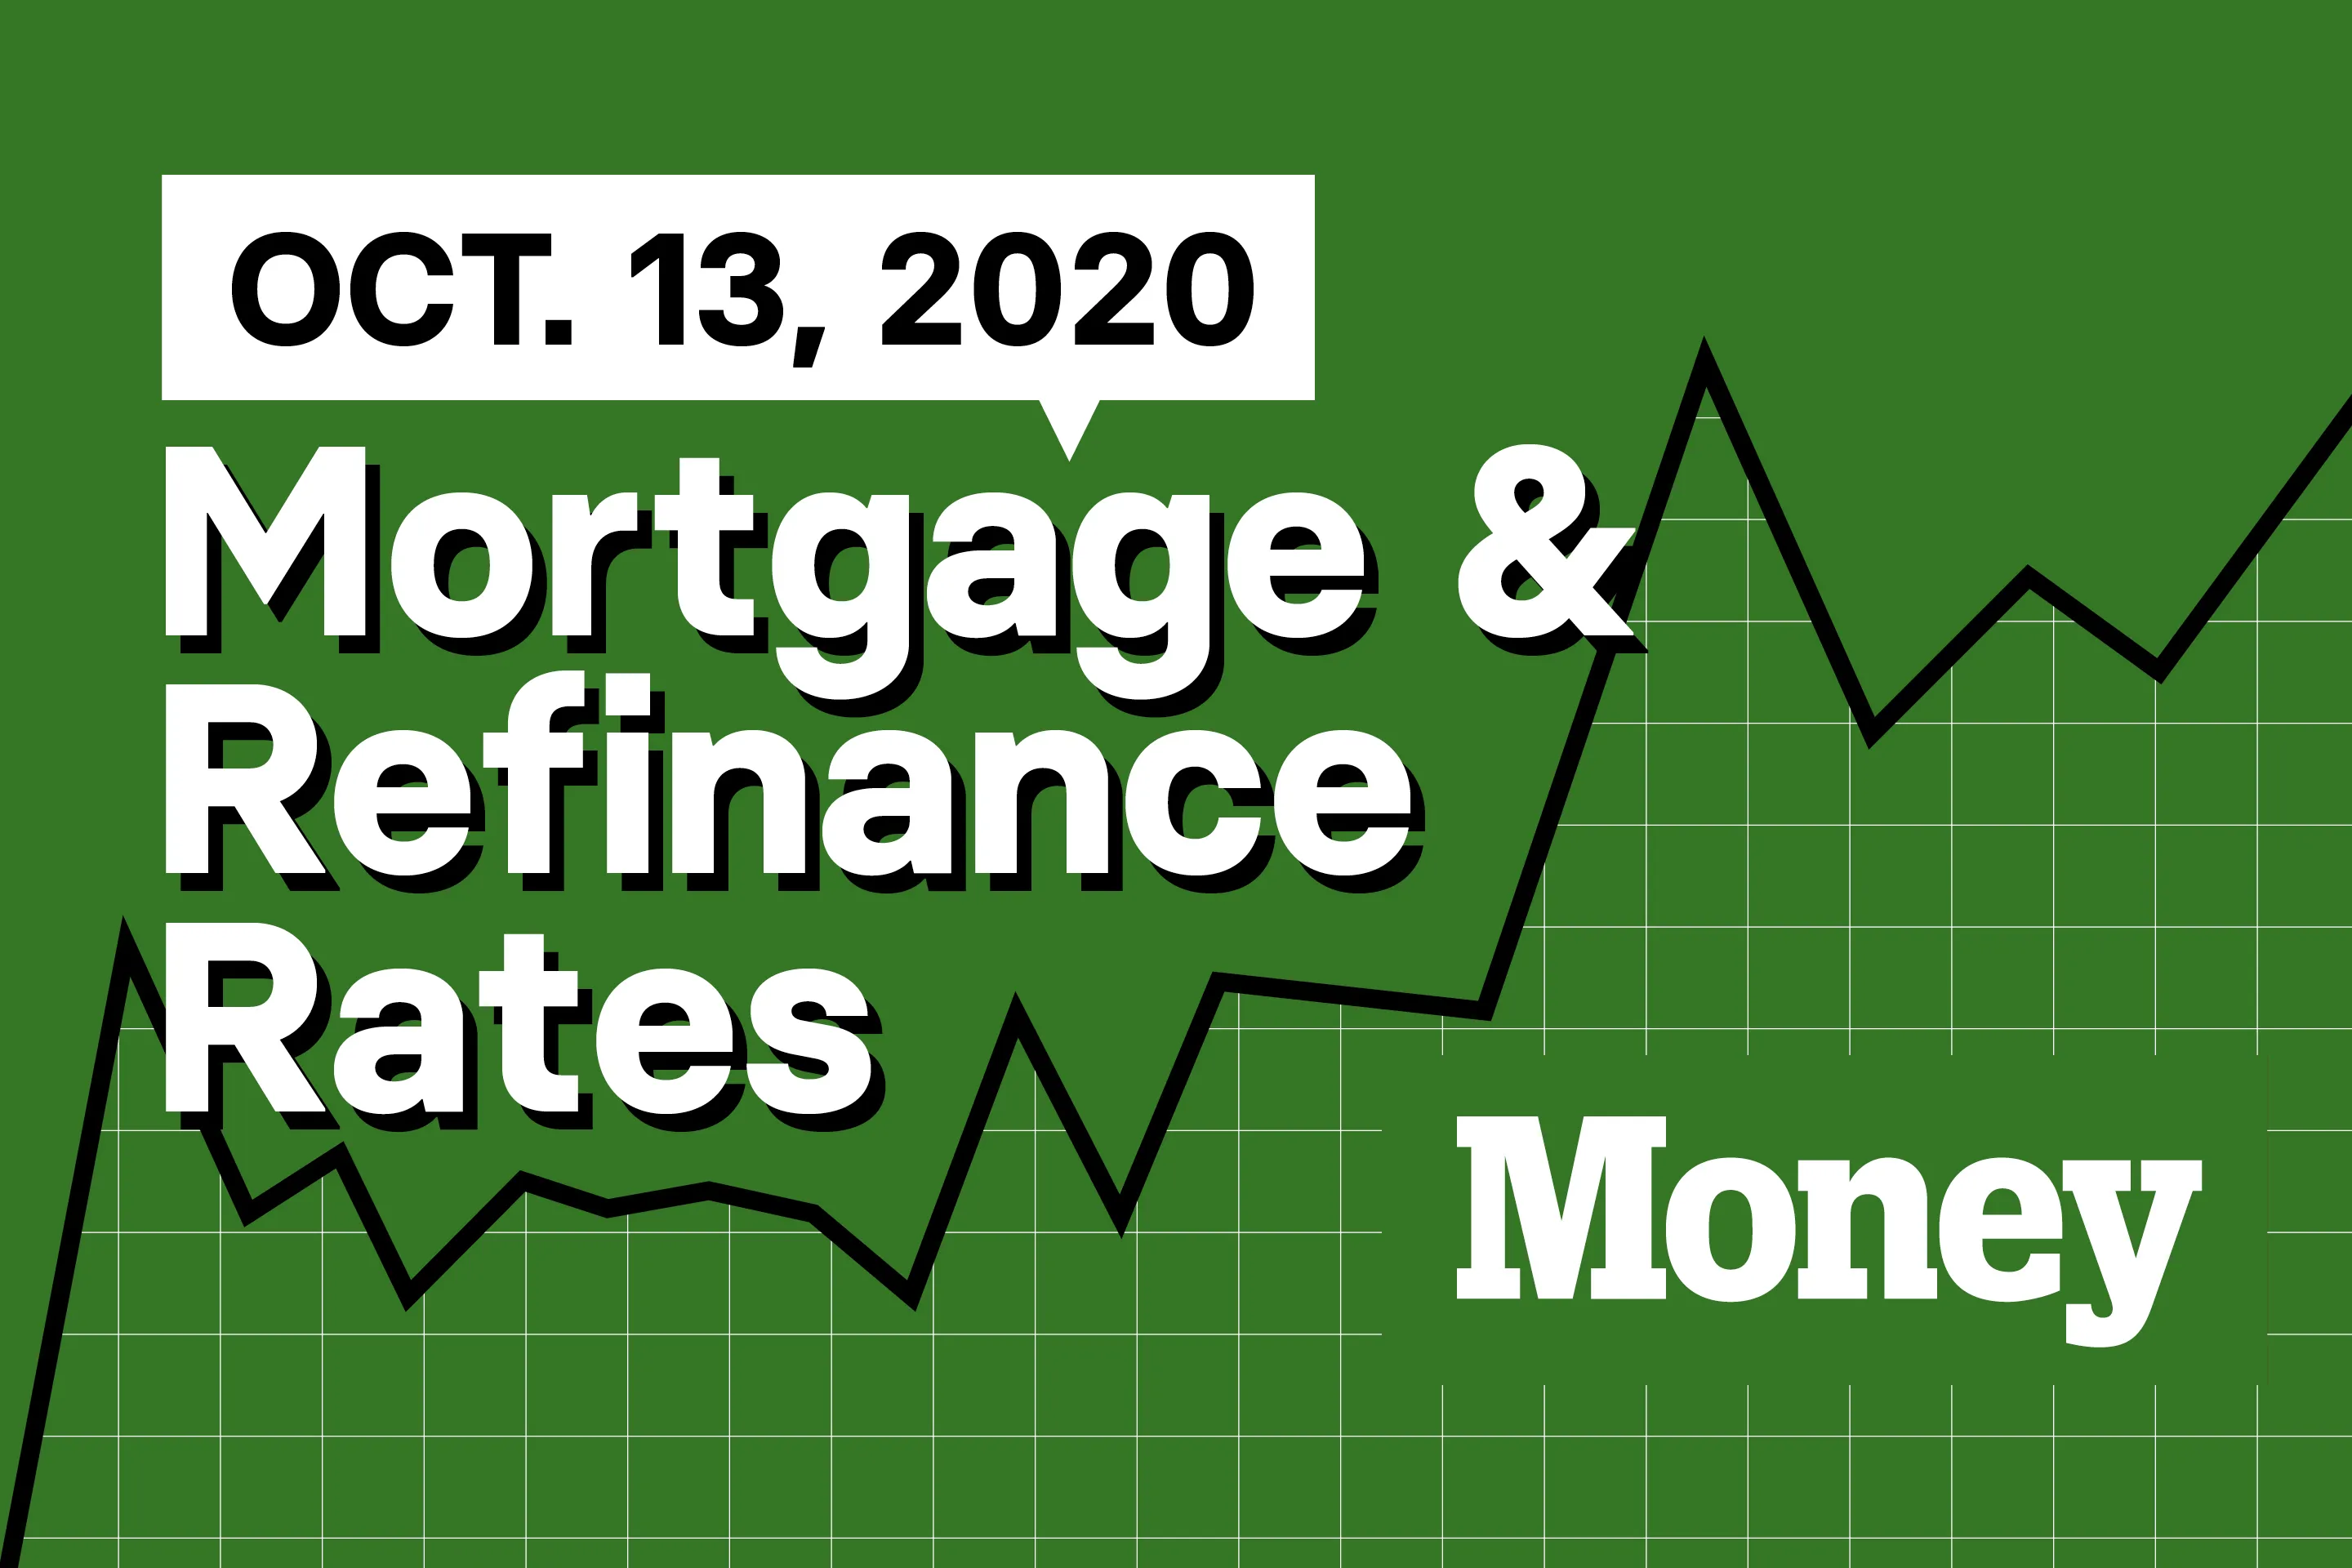 Here Are Today's Best Mortgage & Refinance Rates for October 13, 2020